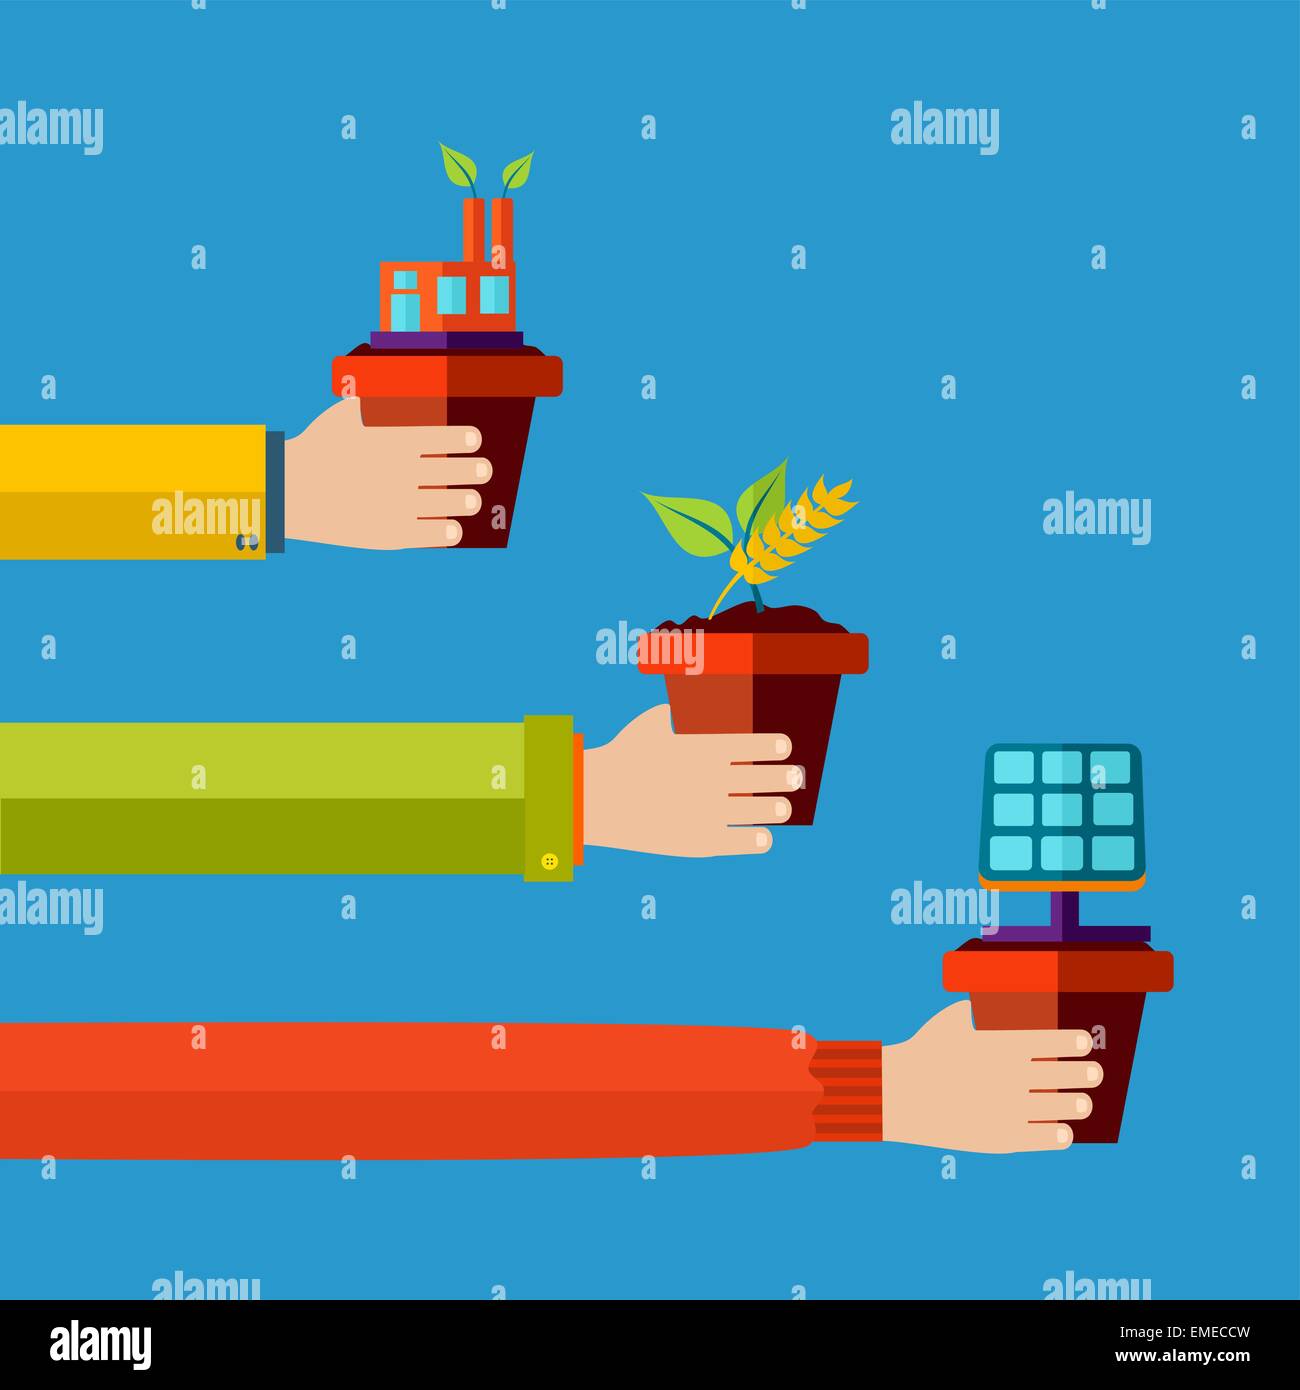 Eco friendly concept flat design background Stock Vector